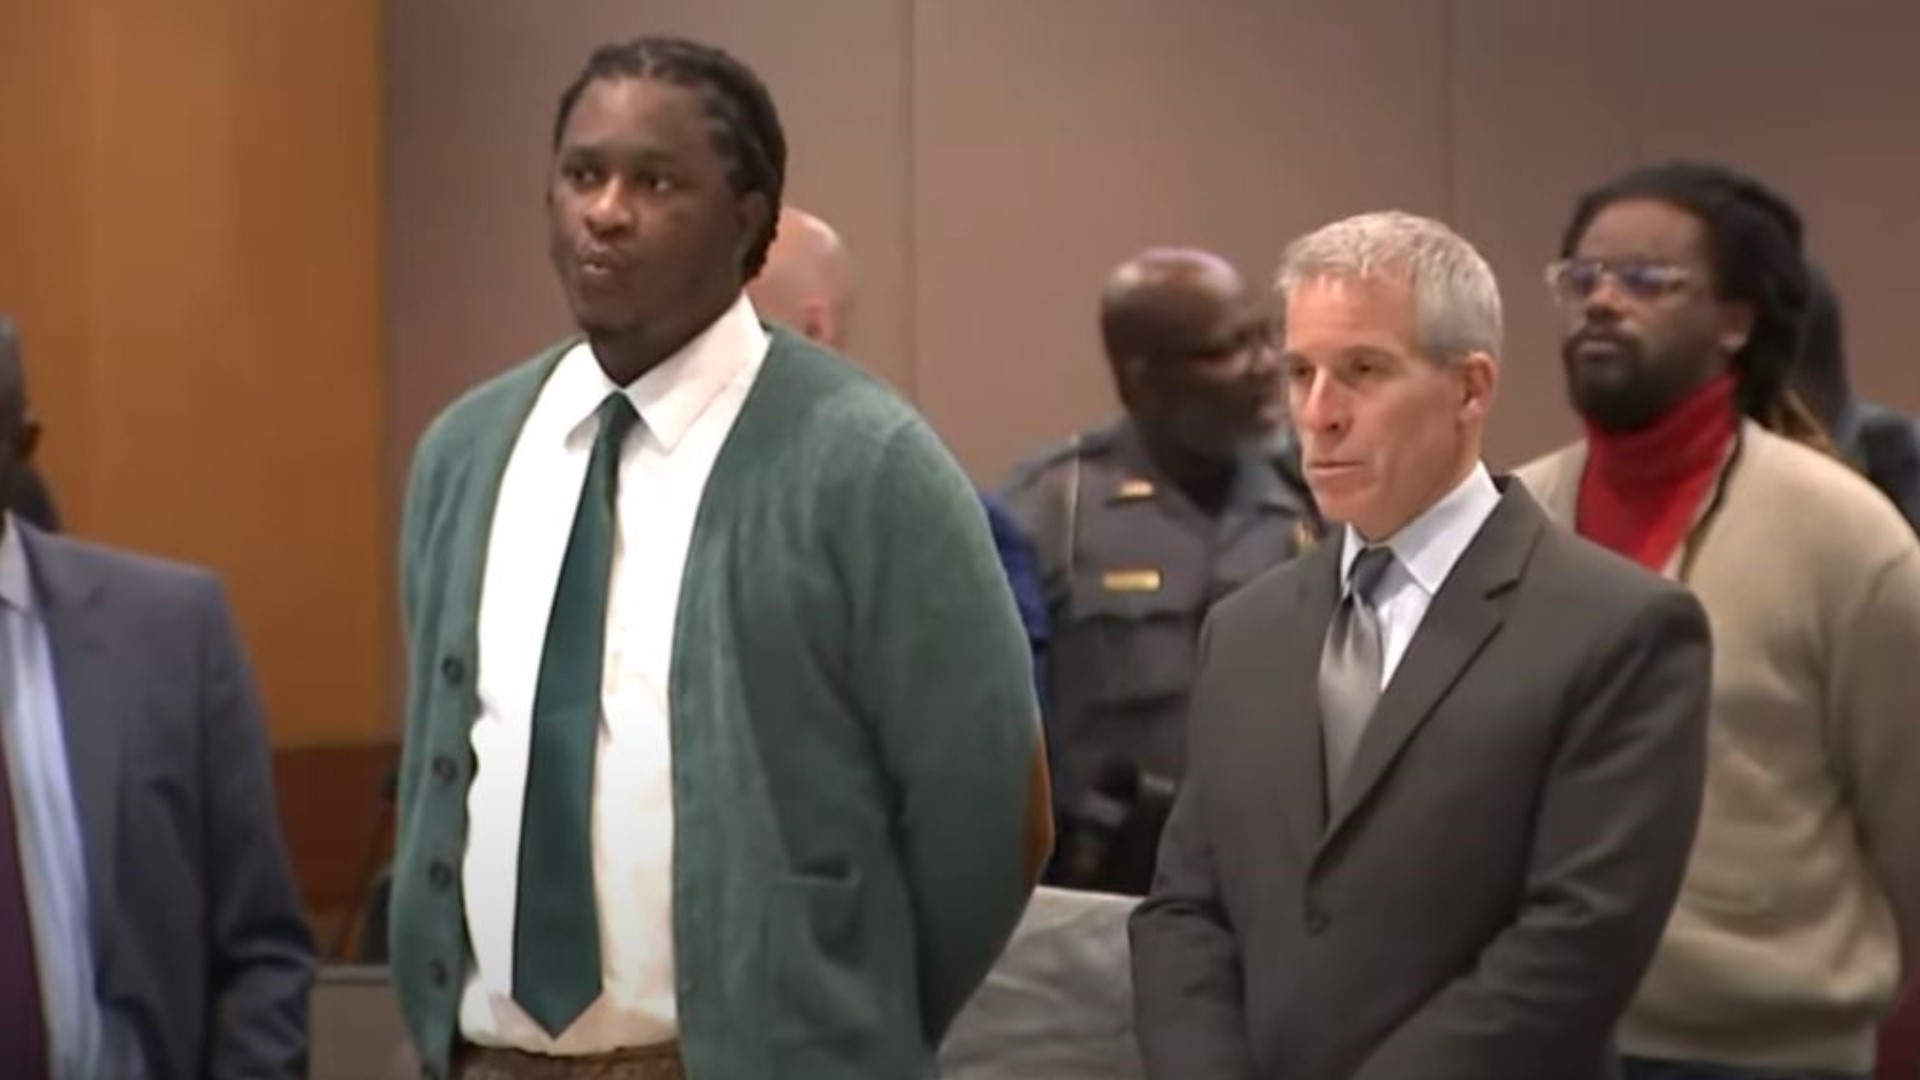 Young Thug, YSL trial | Watch court video | 11alive.com